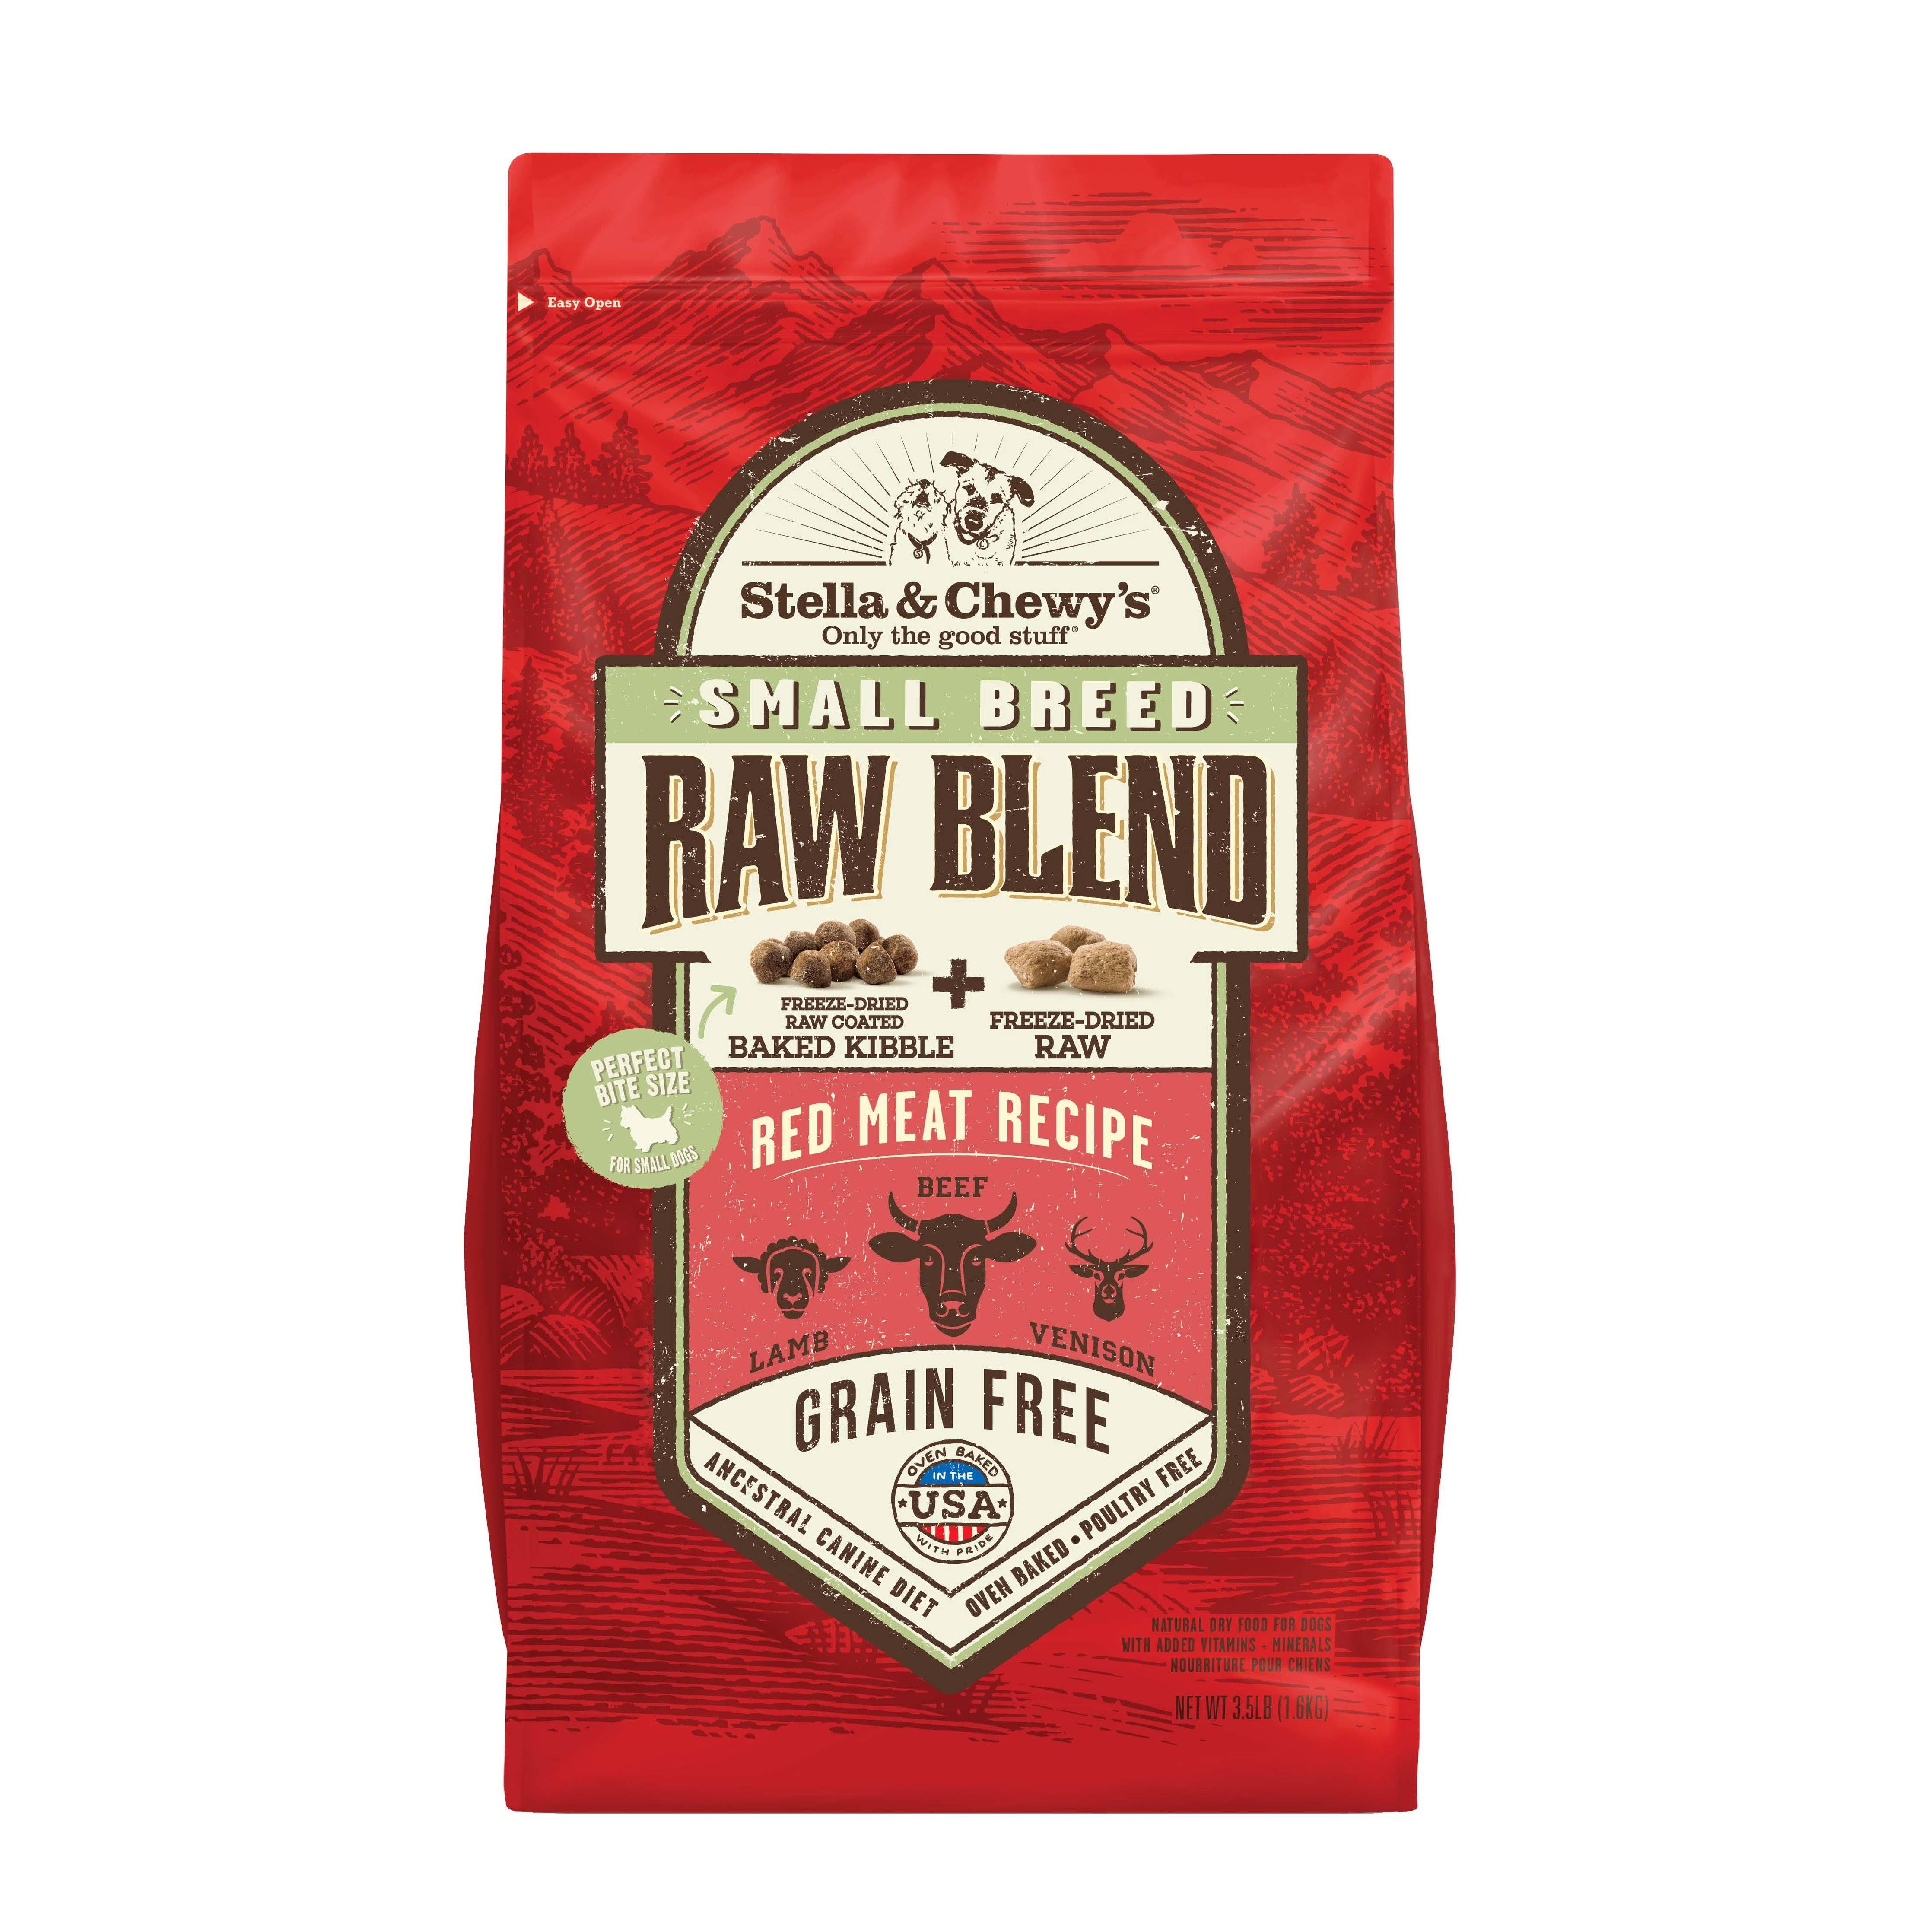 Stella & Chewy’s Small Breed Red Meat Raw Blend Dog Food